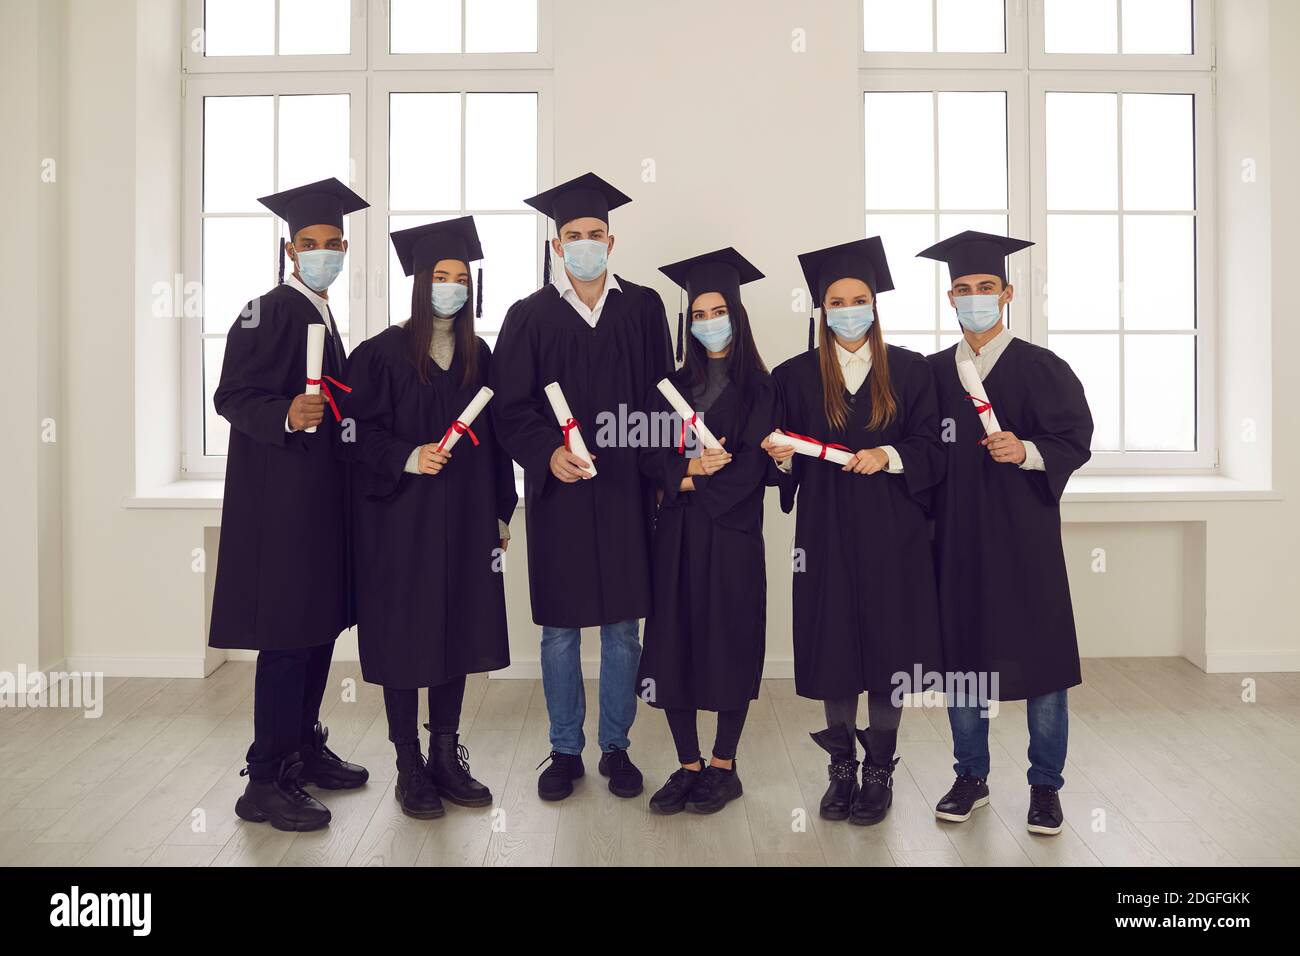 Portrait of successful students with diplomas in their hands and with medical masks on their faces. Stock Photo